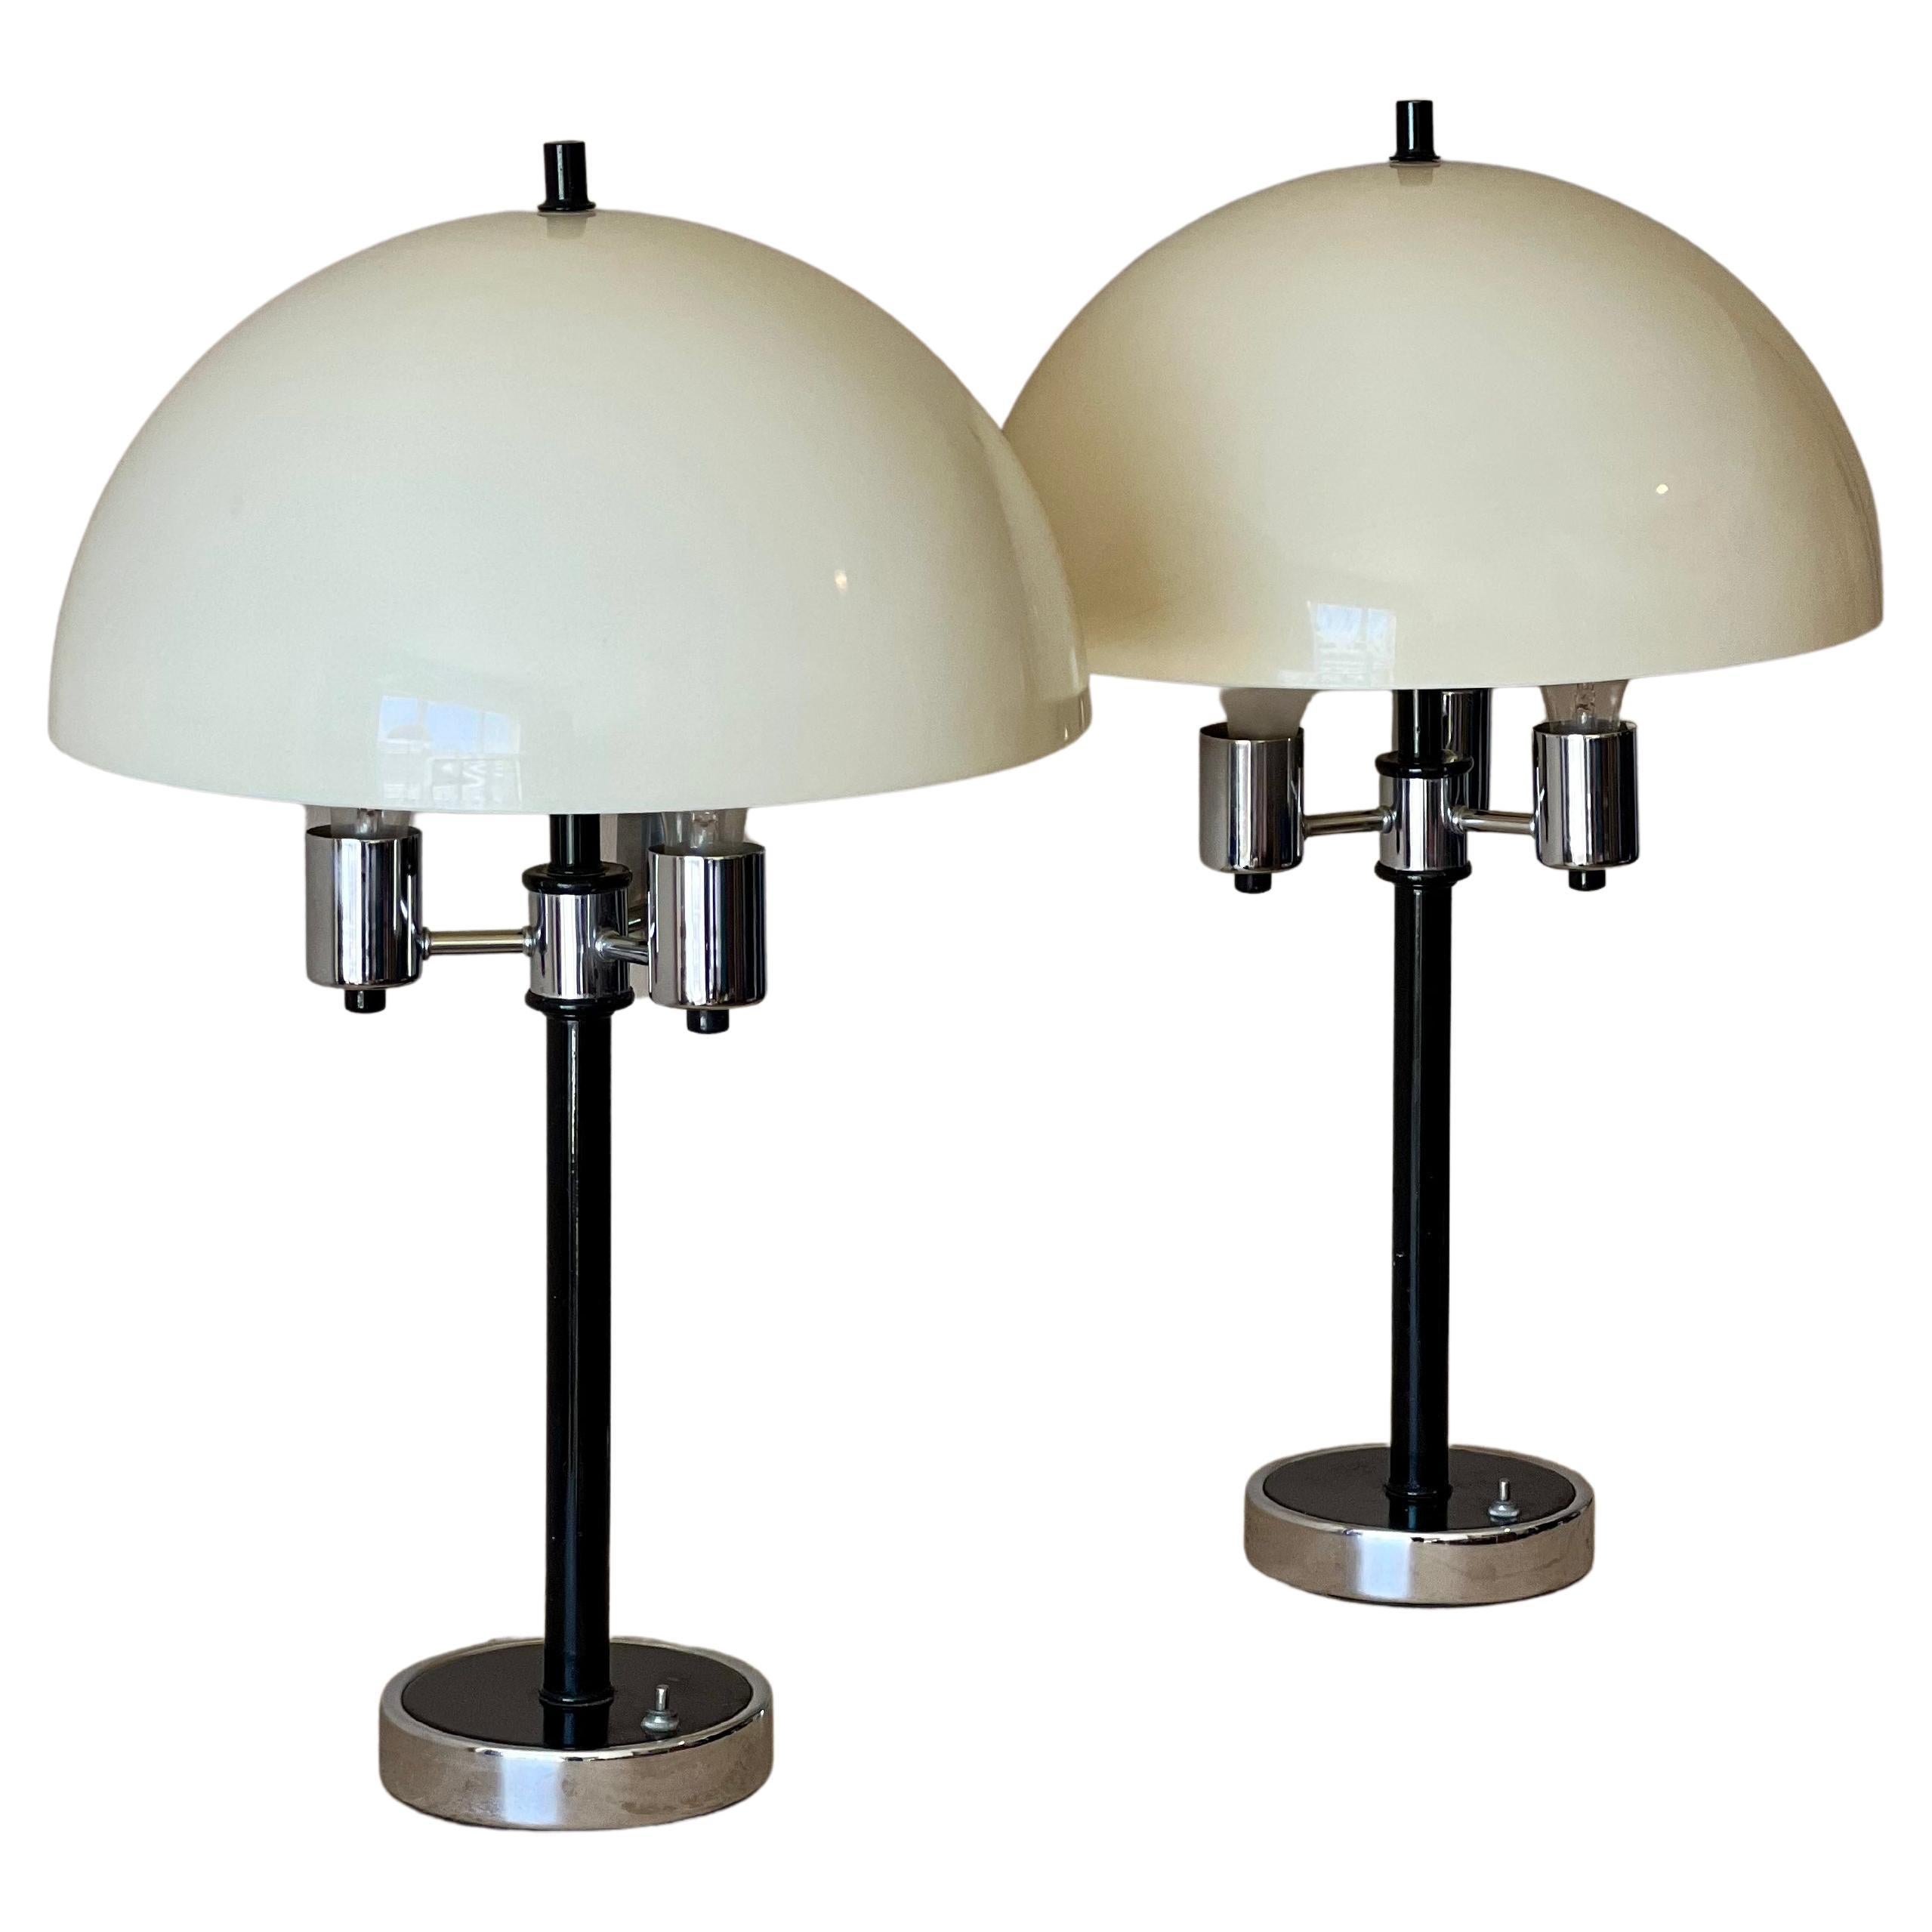 Vintage Space Age Chrome and Plastic Mushroom Lamps For Sale at 1stDibs